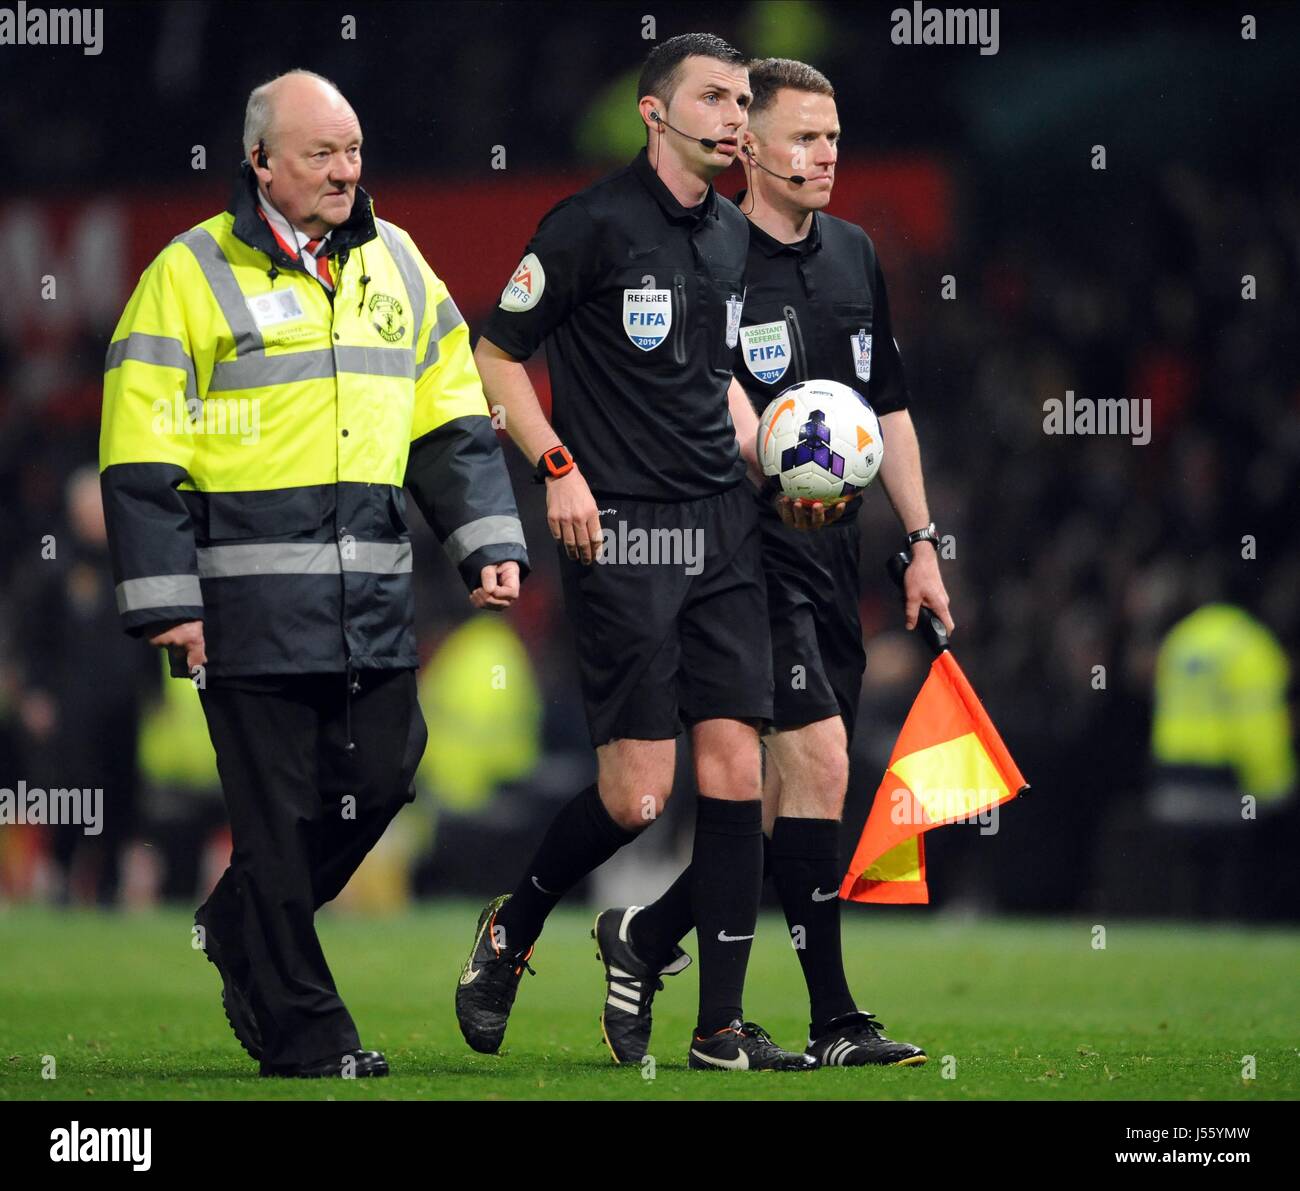 MICHAEL OLIVER LEAVES THE FIEL MANCHESTER UNITED FC V MANCHES OLD TRAFFORD MANCHESTER ENGLAND 25 March 2014 Stock Photo